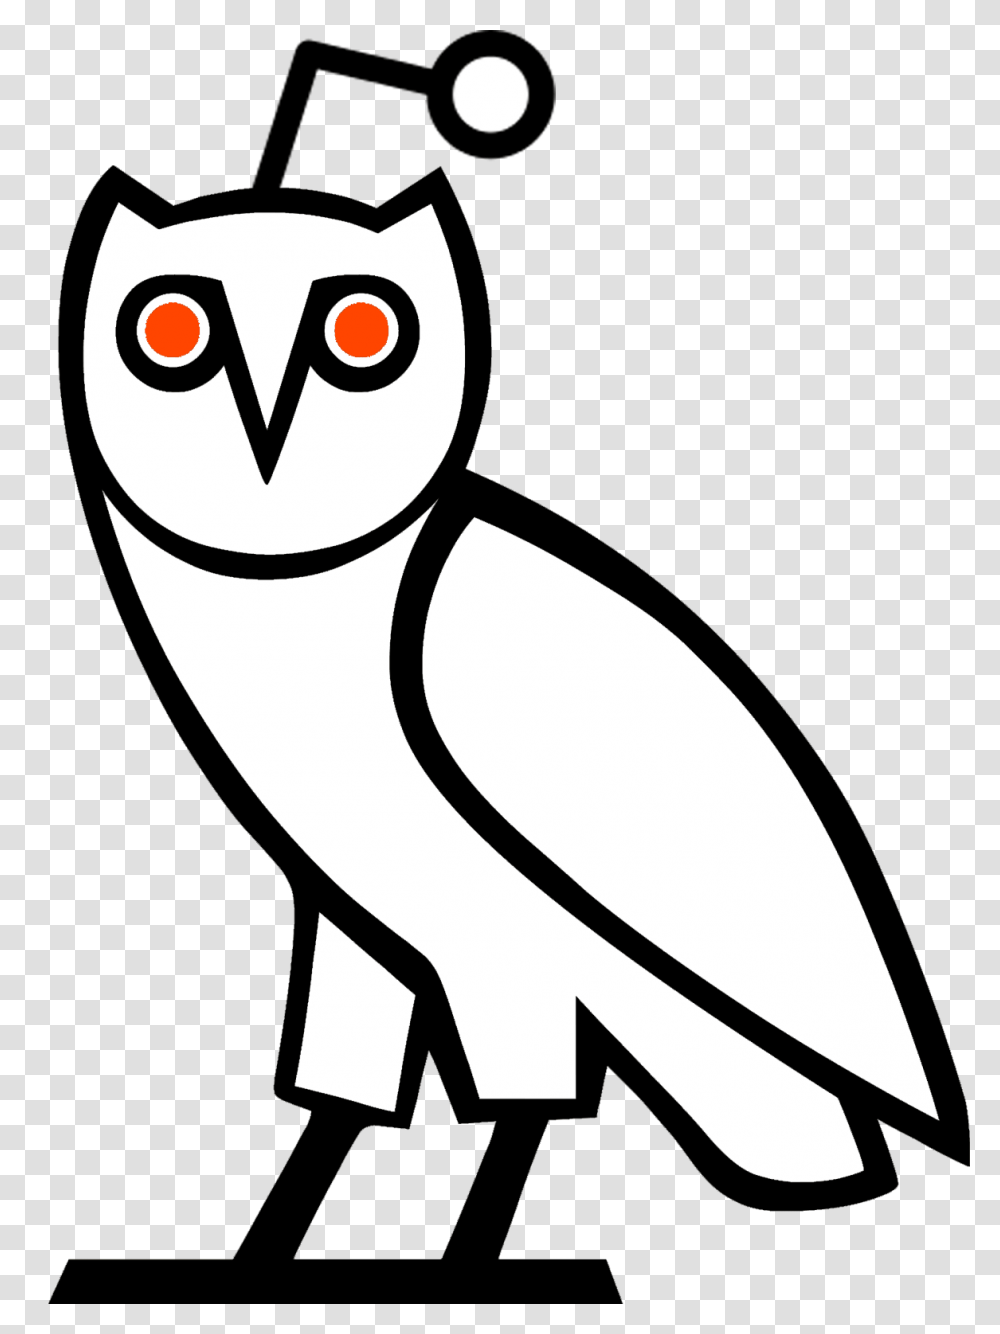 I Made A Rdrizzy Reddit Snoo Drizzy Animal Bird Penguin Owl Transparent Png Pngset Com